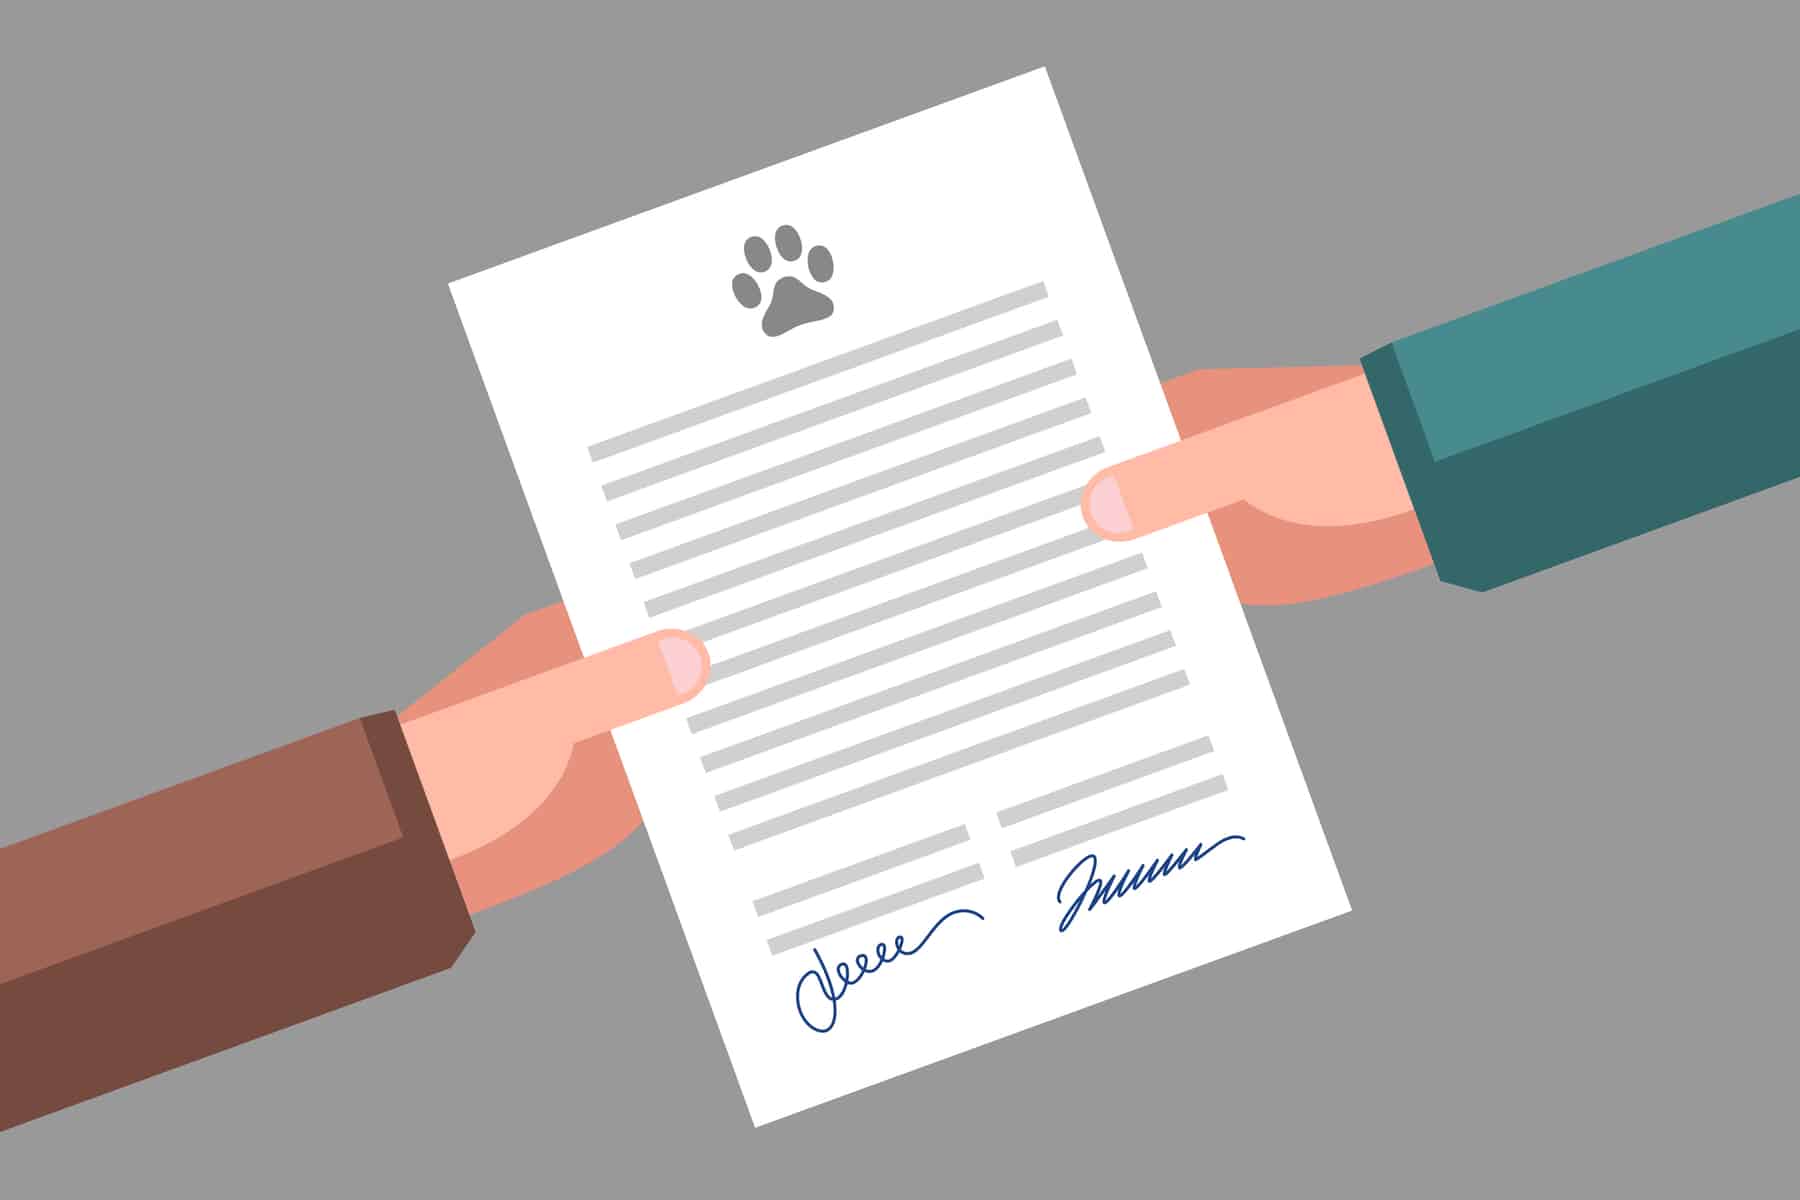 Document in hands. Signing of pet adoption or sale agreement